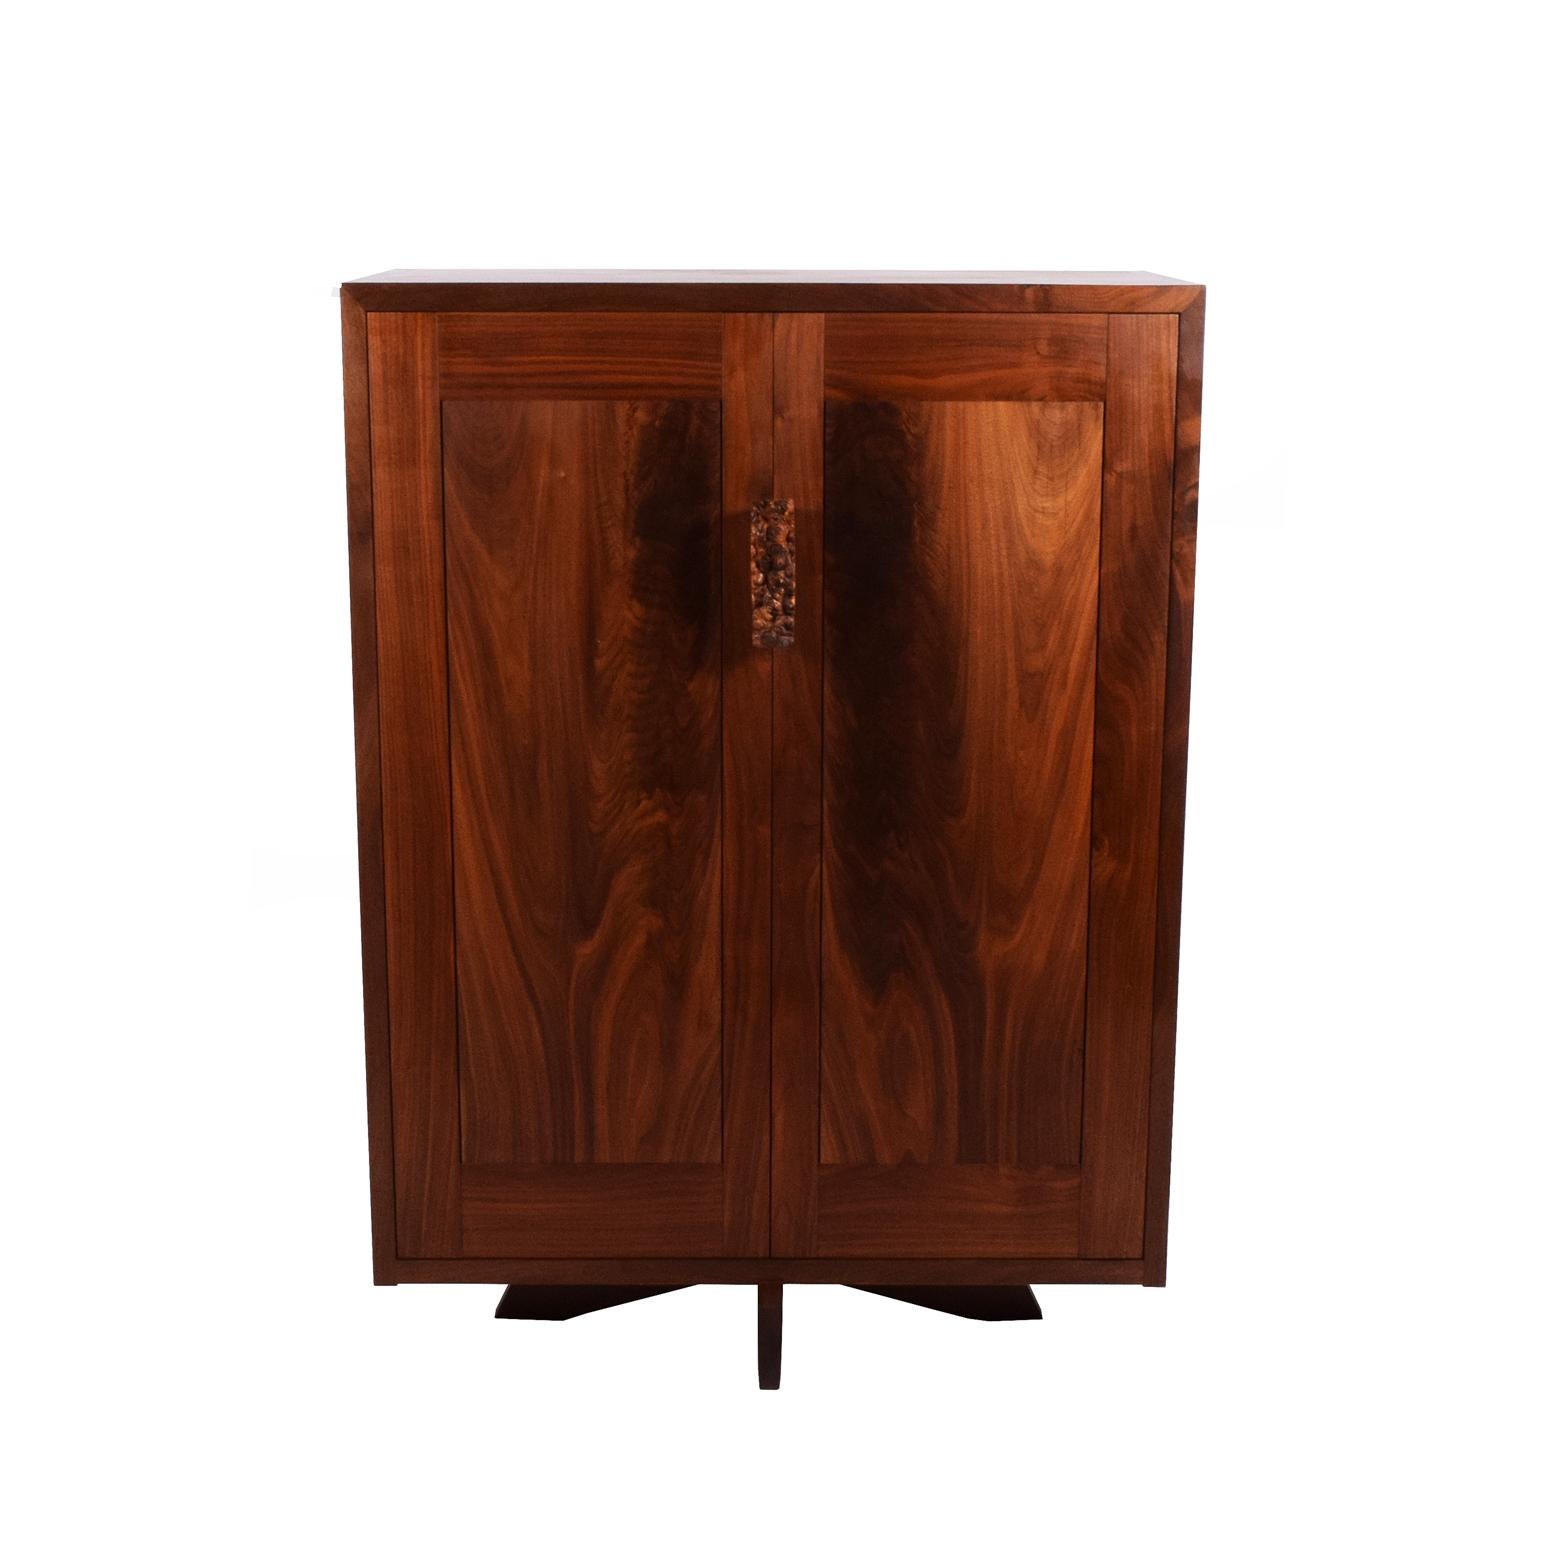 American black walnut large cabinet freestanding with two doors and five shelves burl handle D 4